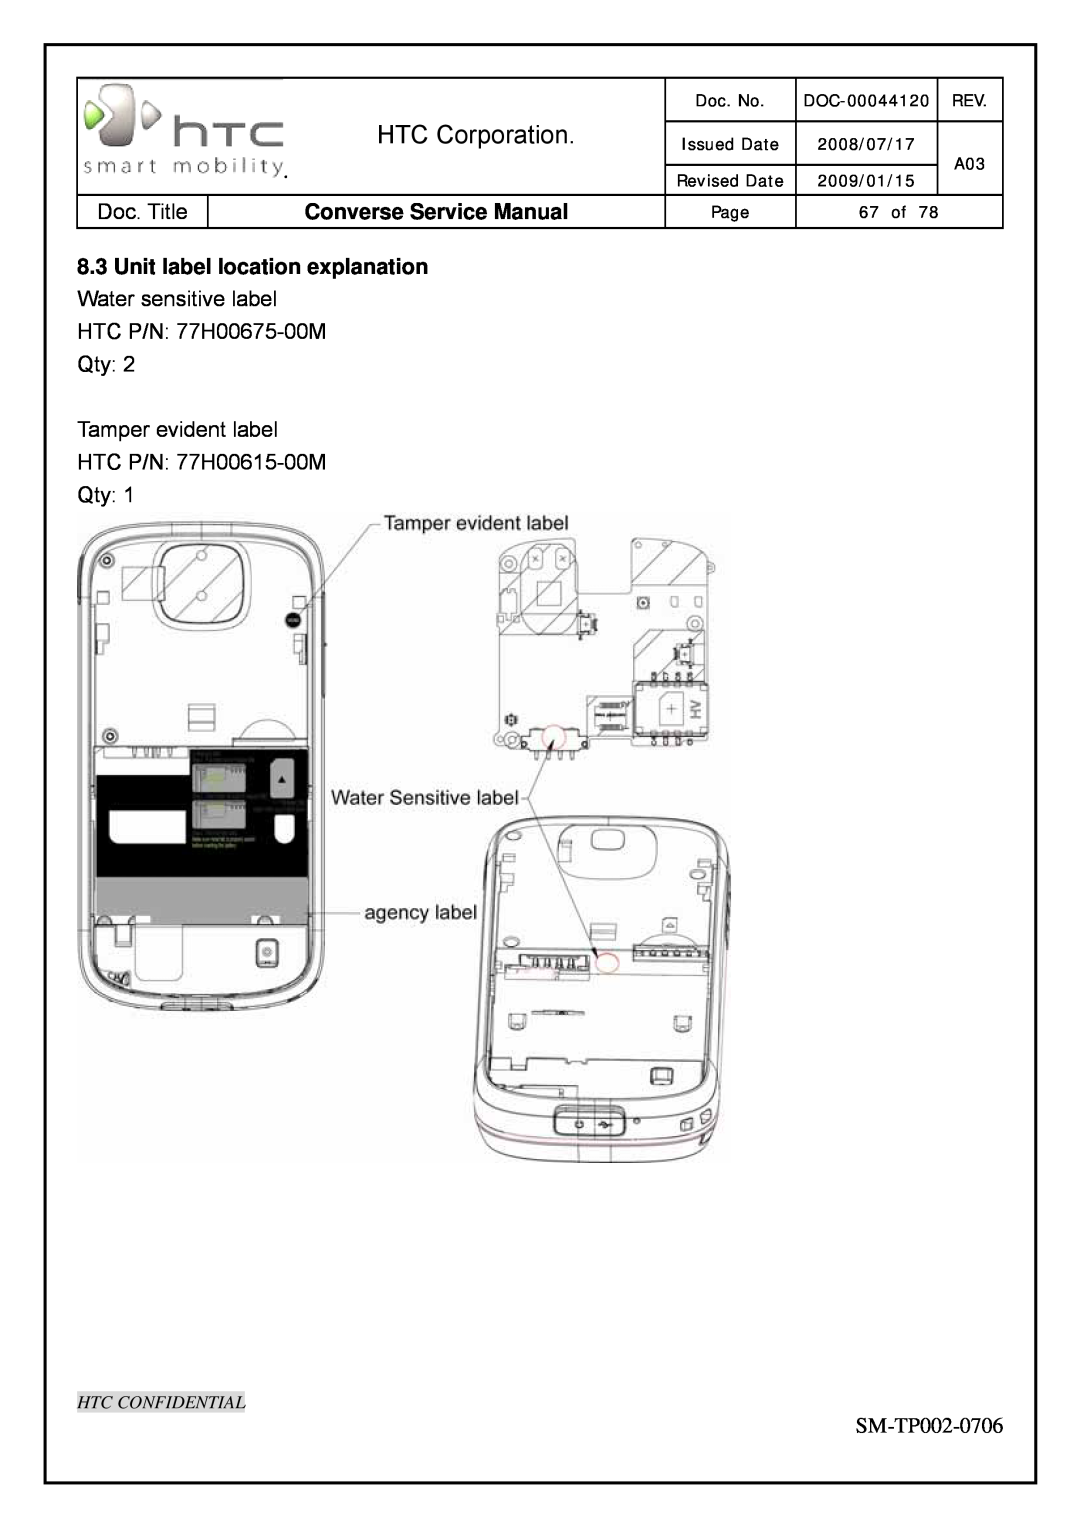 HTC SM-TP002-0706 HTC Corporation, Converse Service Manual, Htc Confidential, Doc. No, DOC-00044120, 67 of, Issued Date 